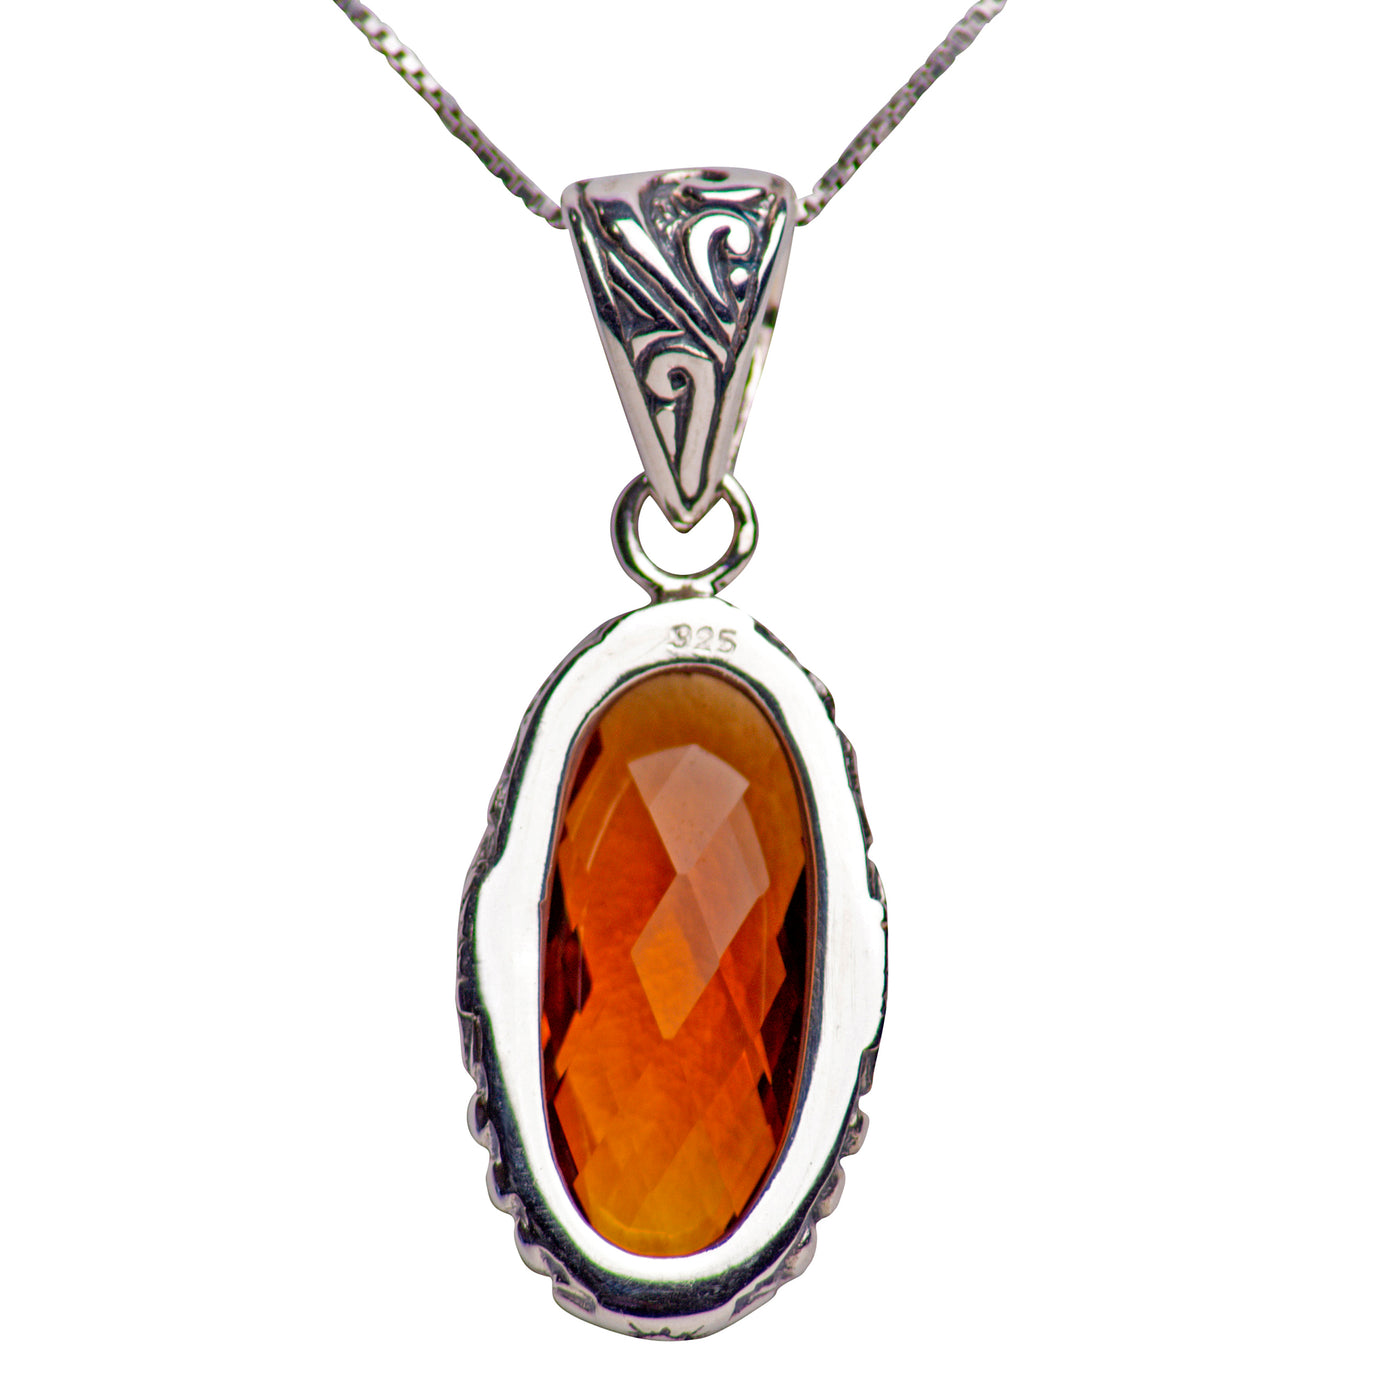 Oval Citrine Quartz and Sterling Silver Pendant Necklace